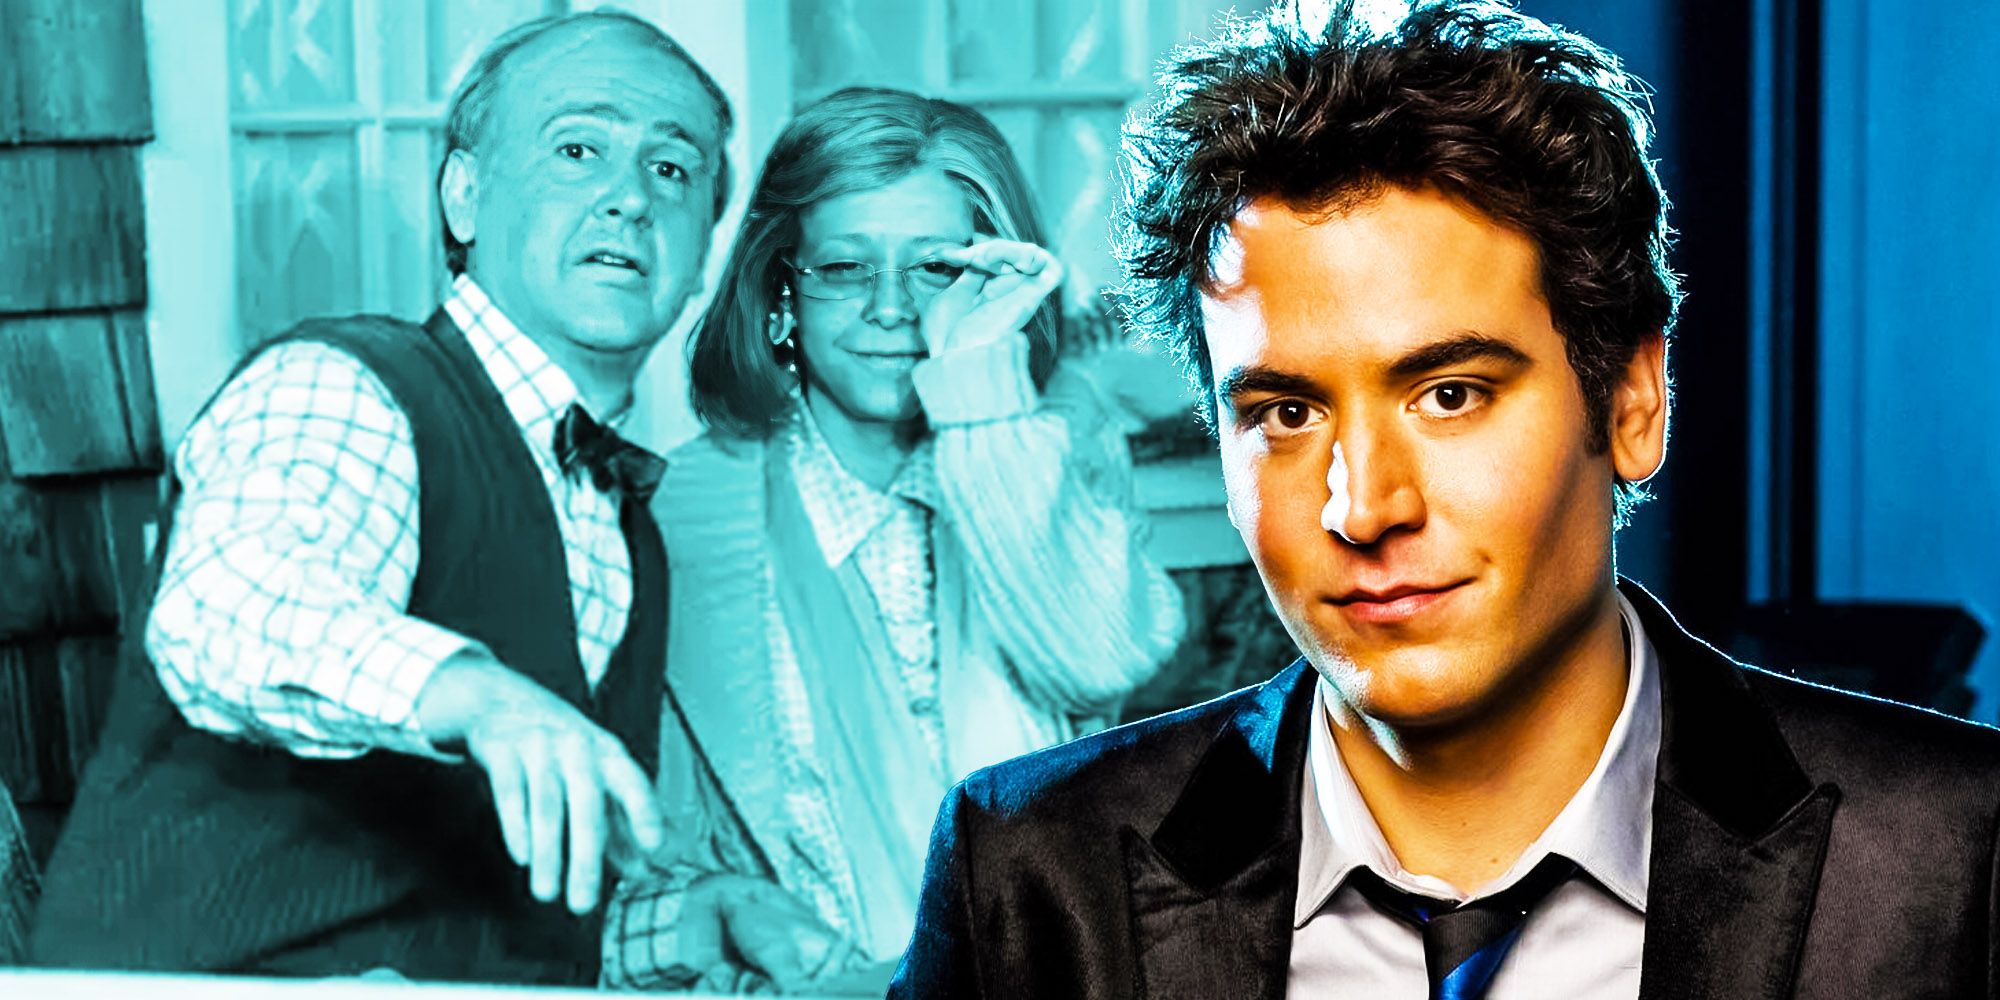 Jason Segel as Marshall, Alyson Hannigan as Lily, and Josh Radnor as Ted in How I Met Your Mother season 4